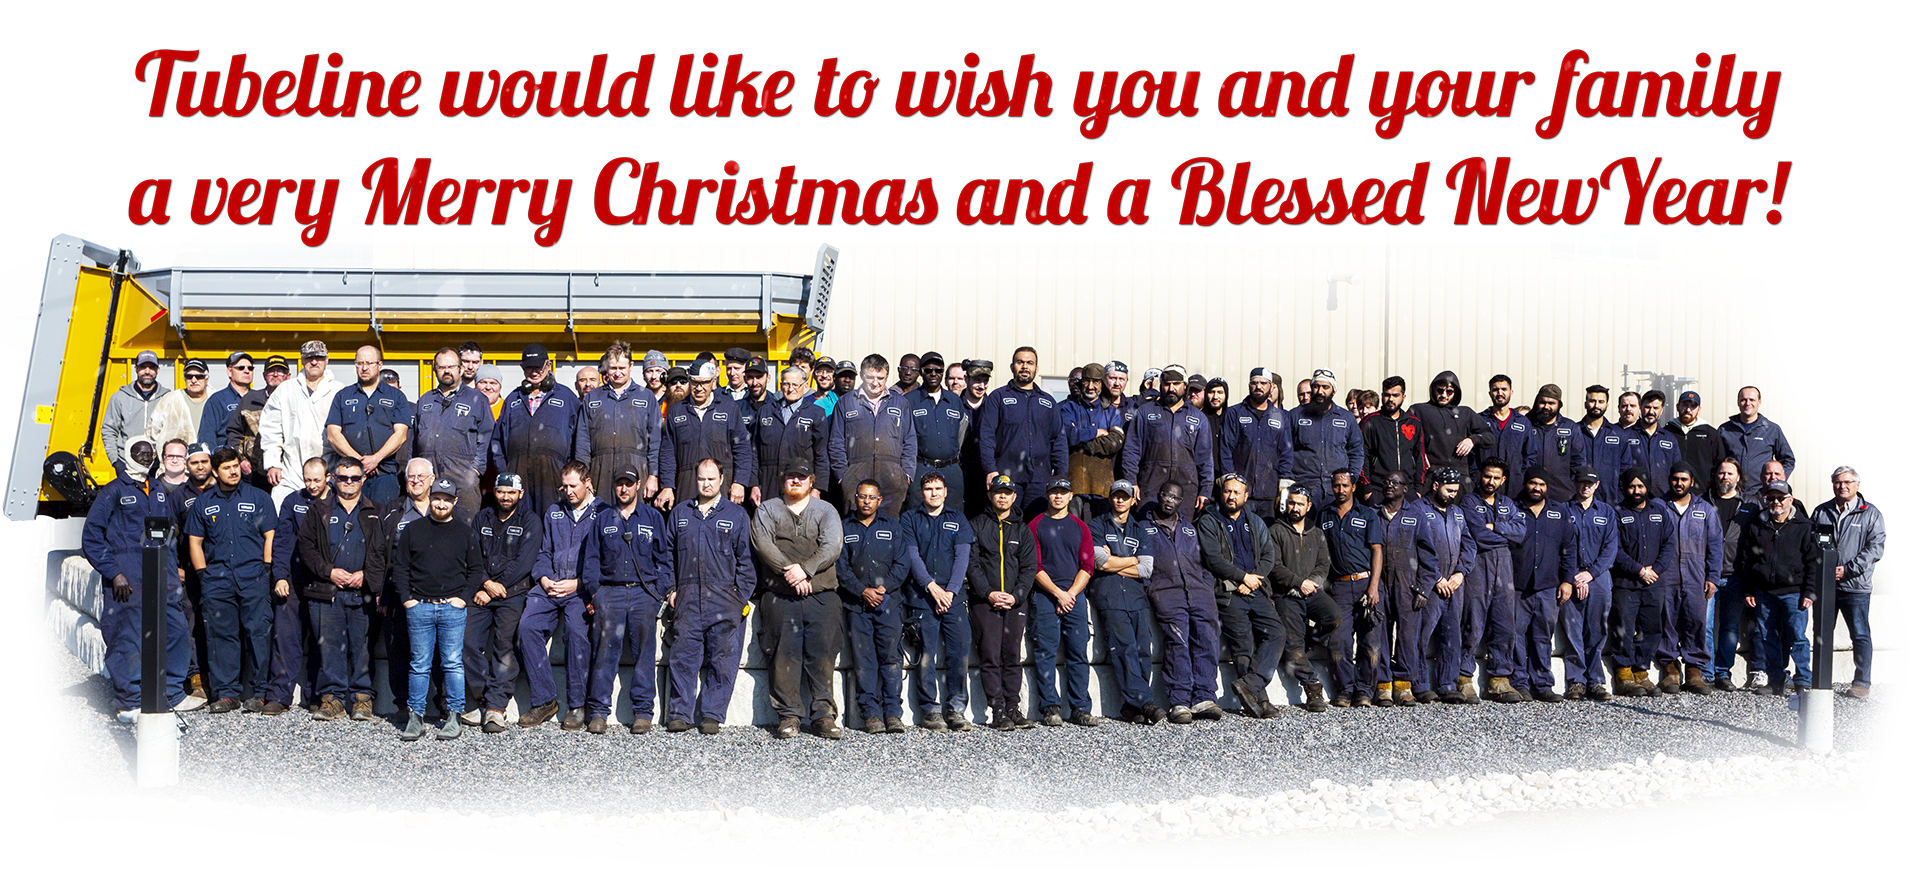 Merry Christmas from the Tubeline team!